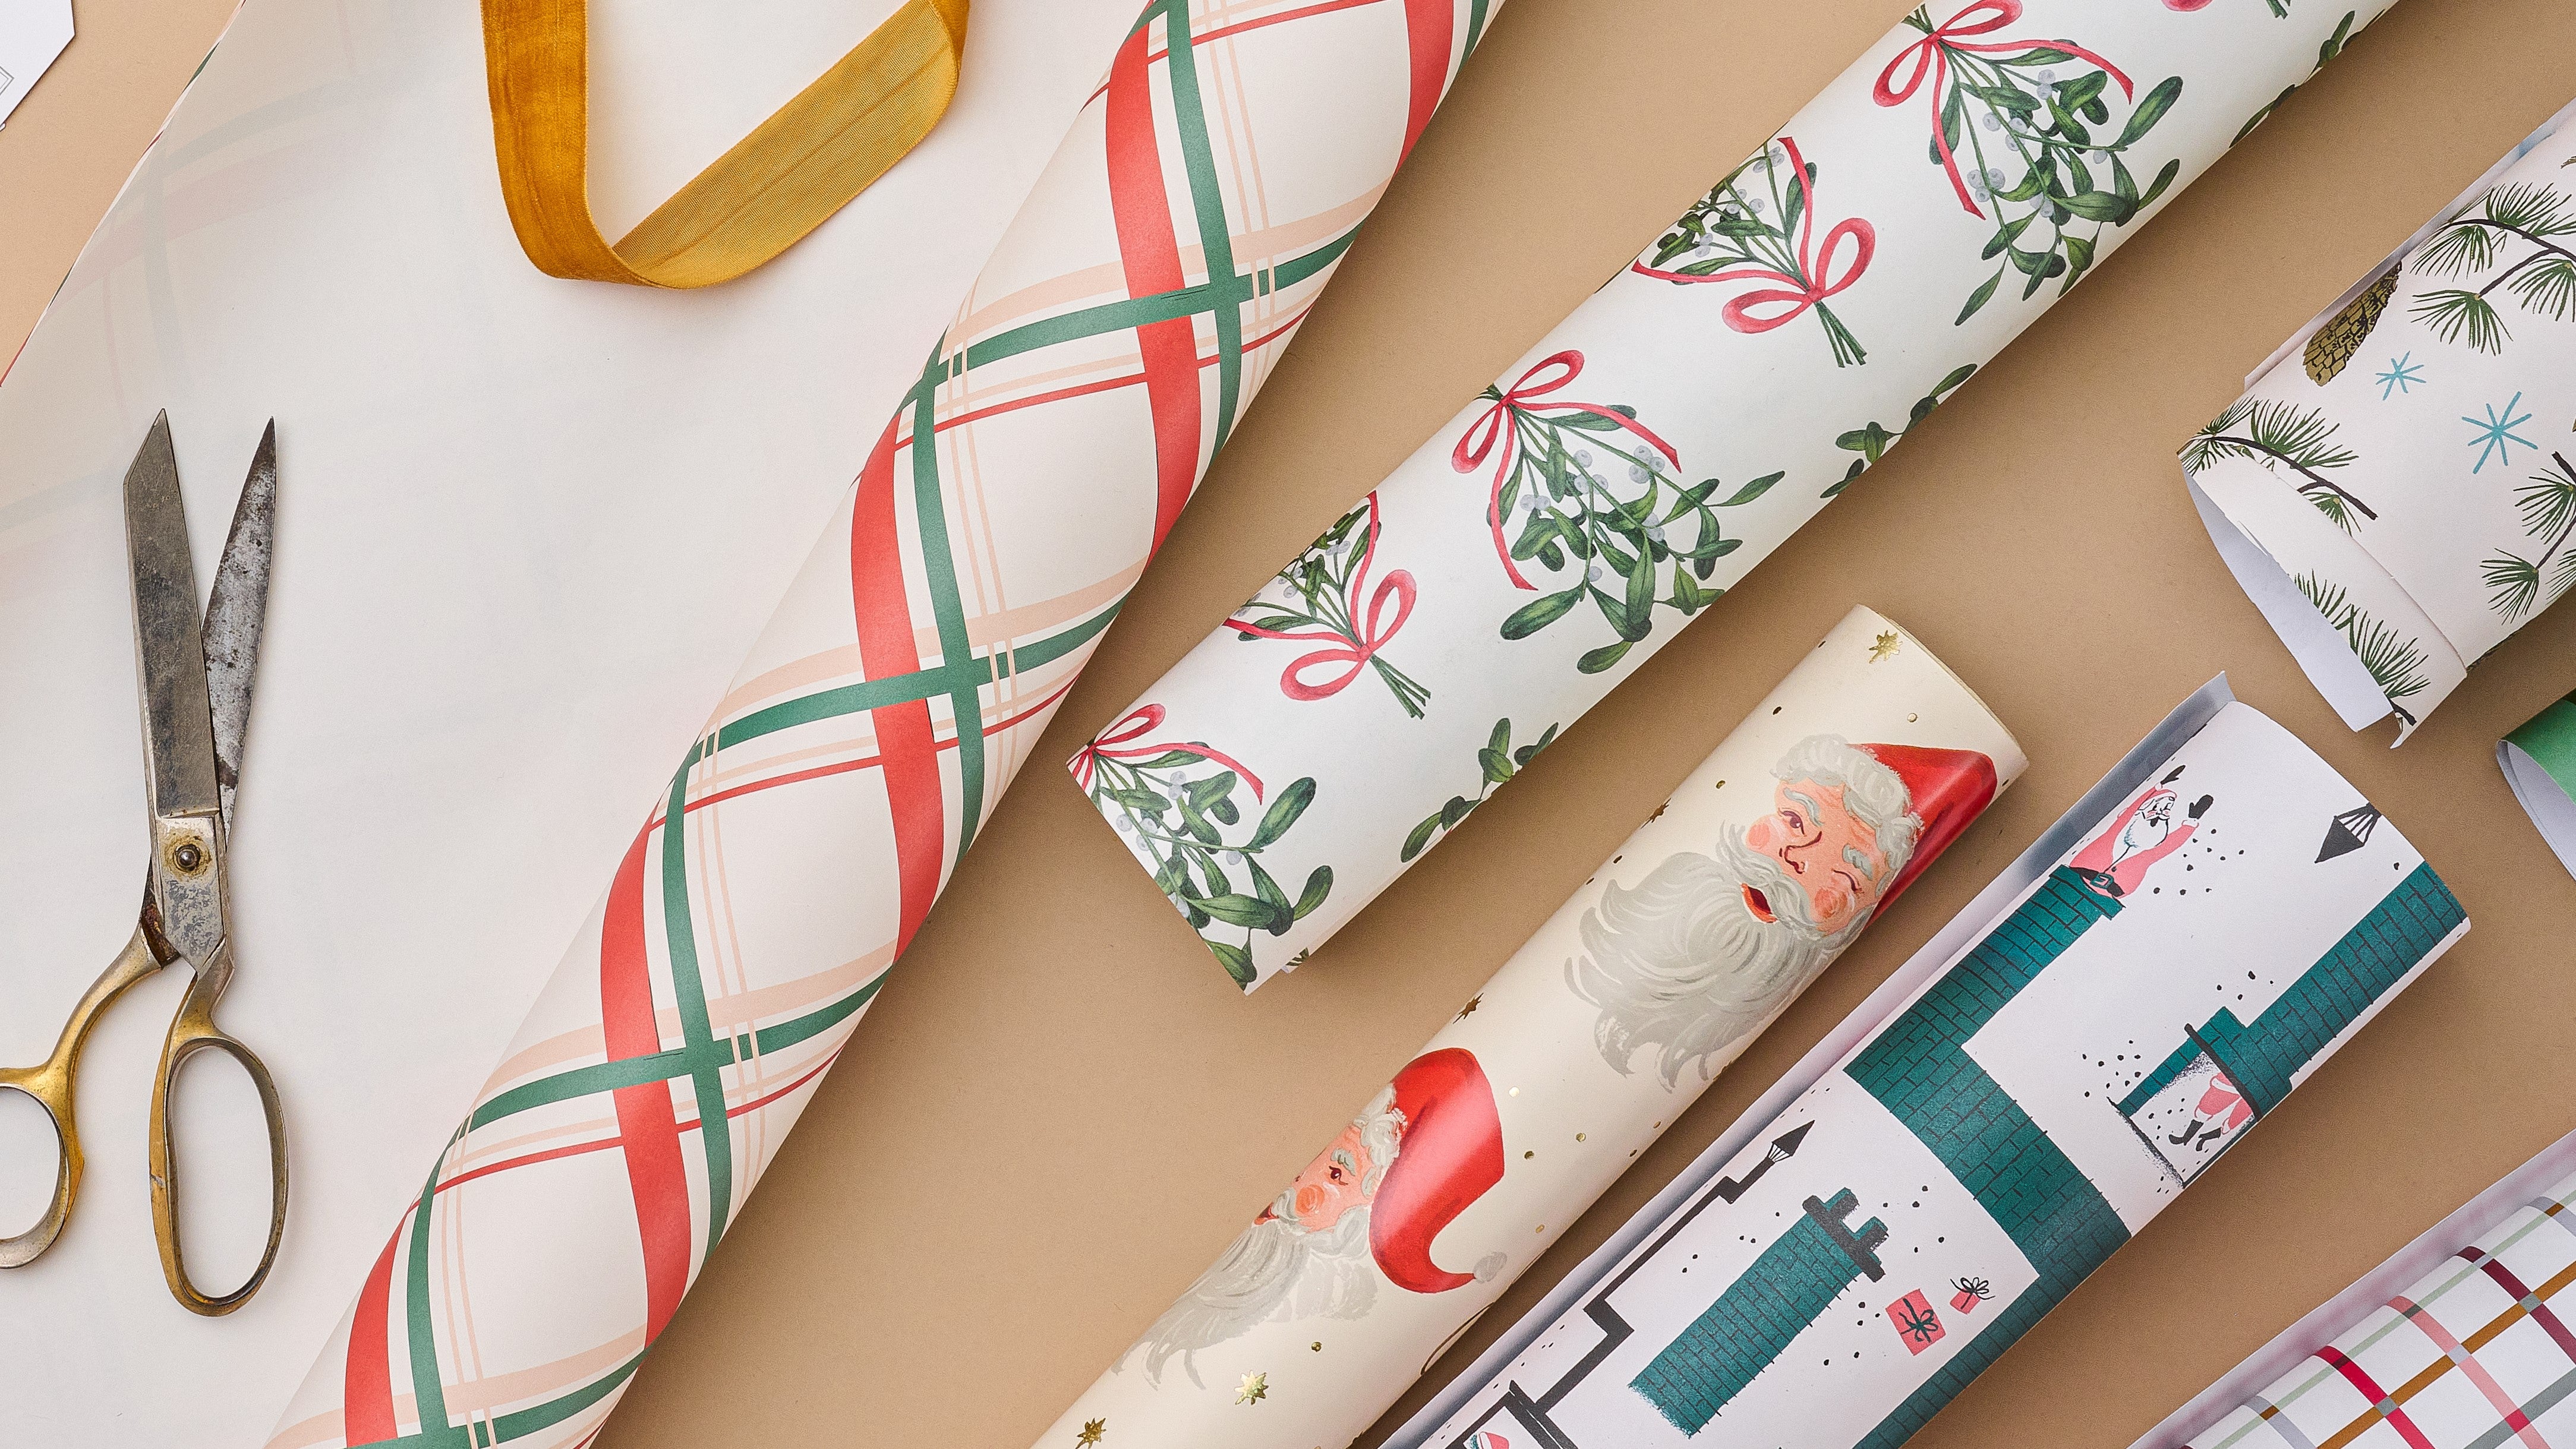 MarketDwellings - Attach this tag to Christmas wrapping paper